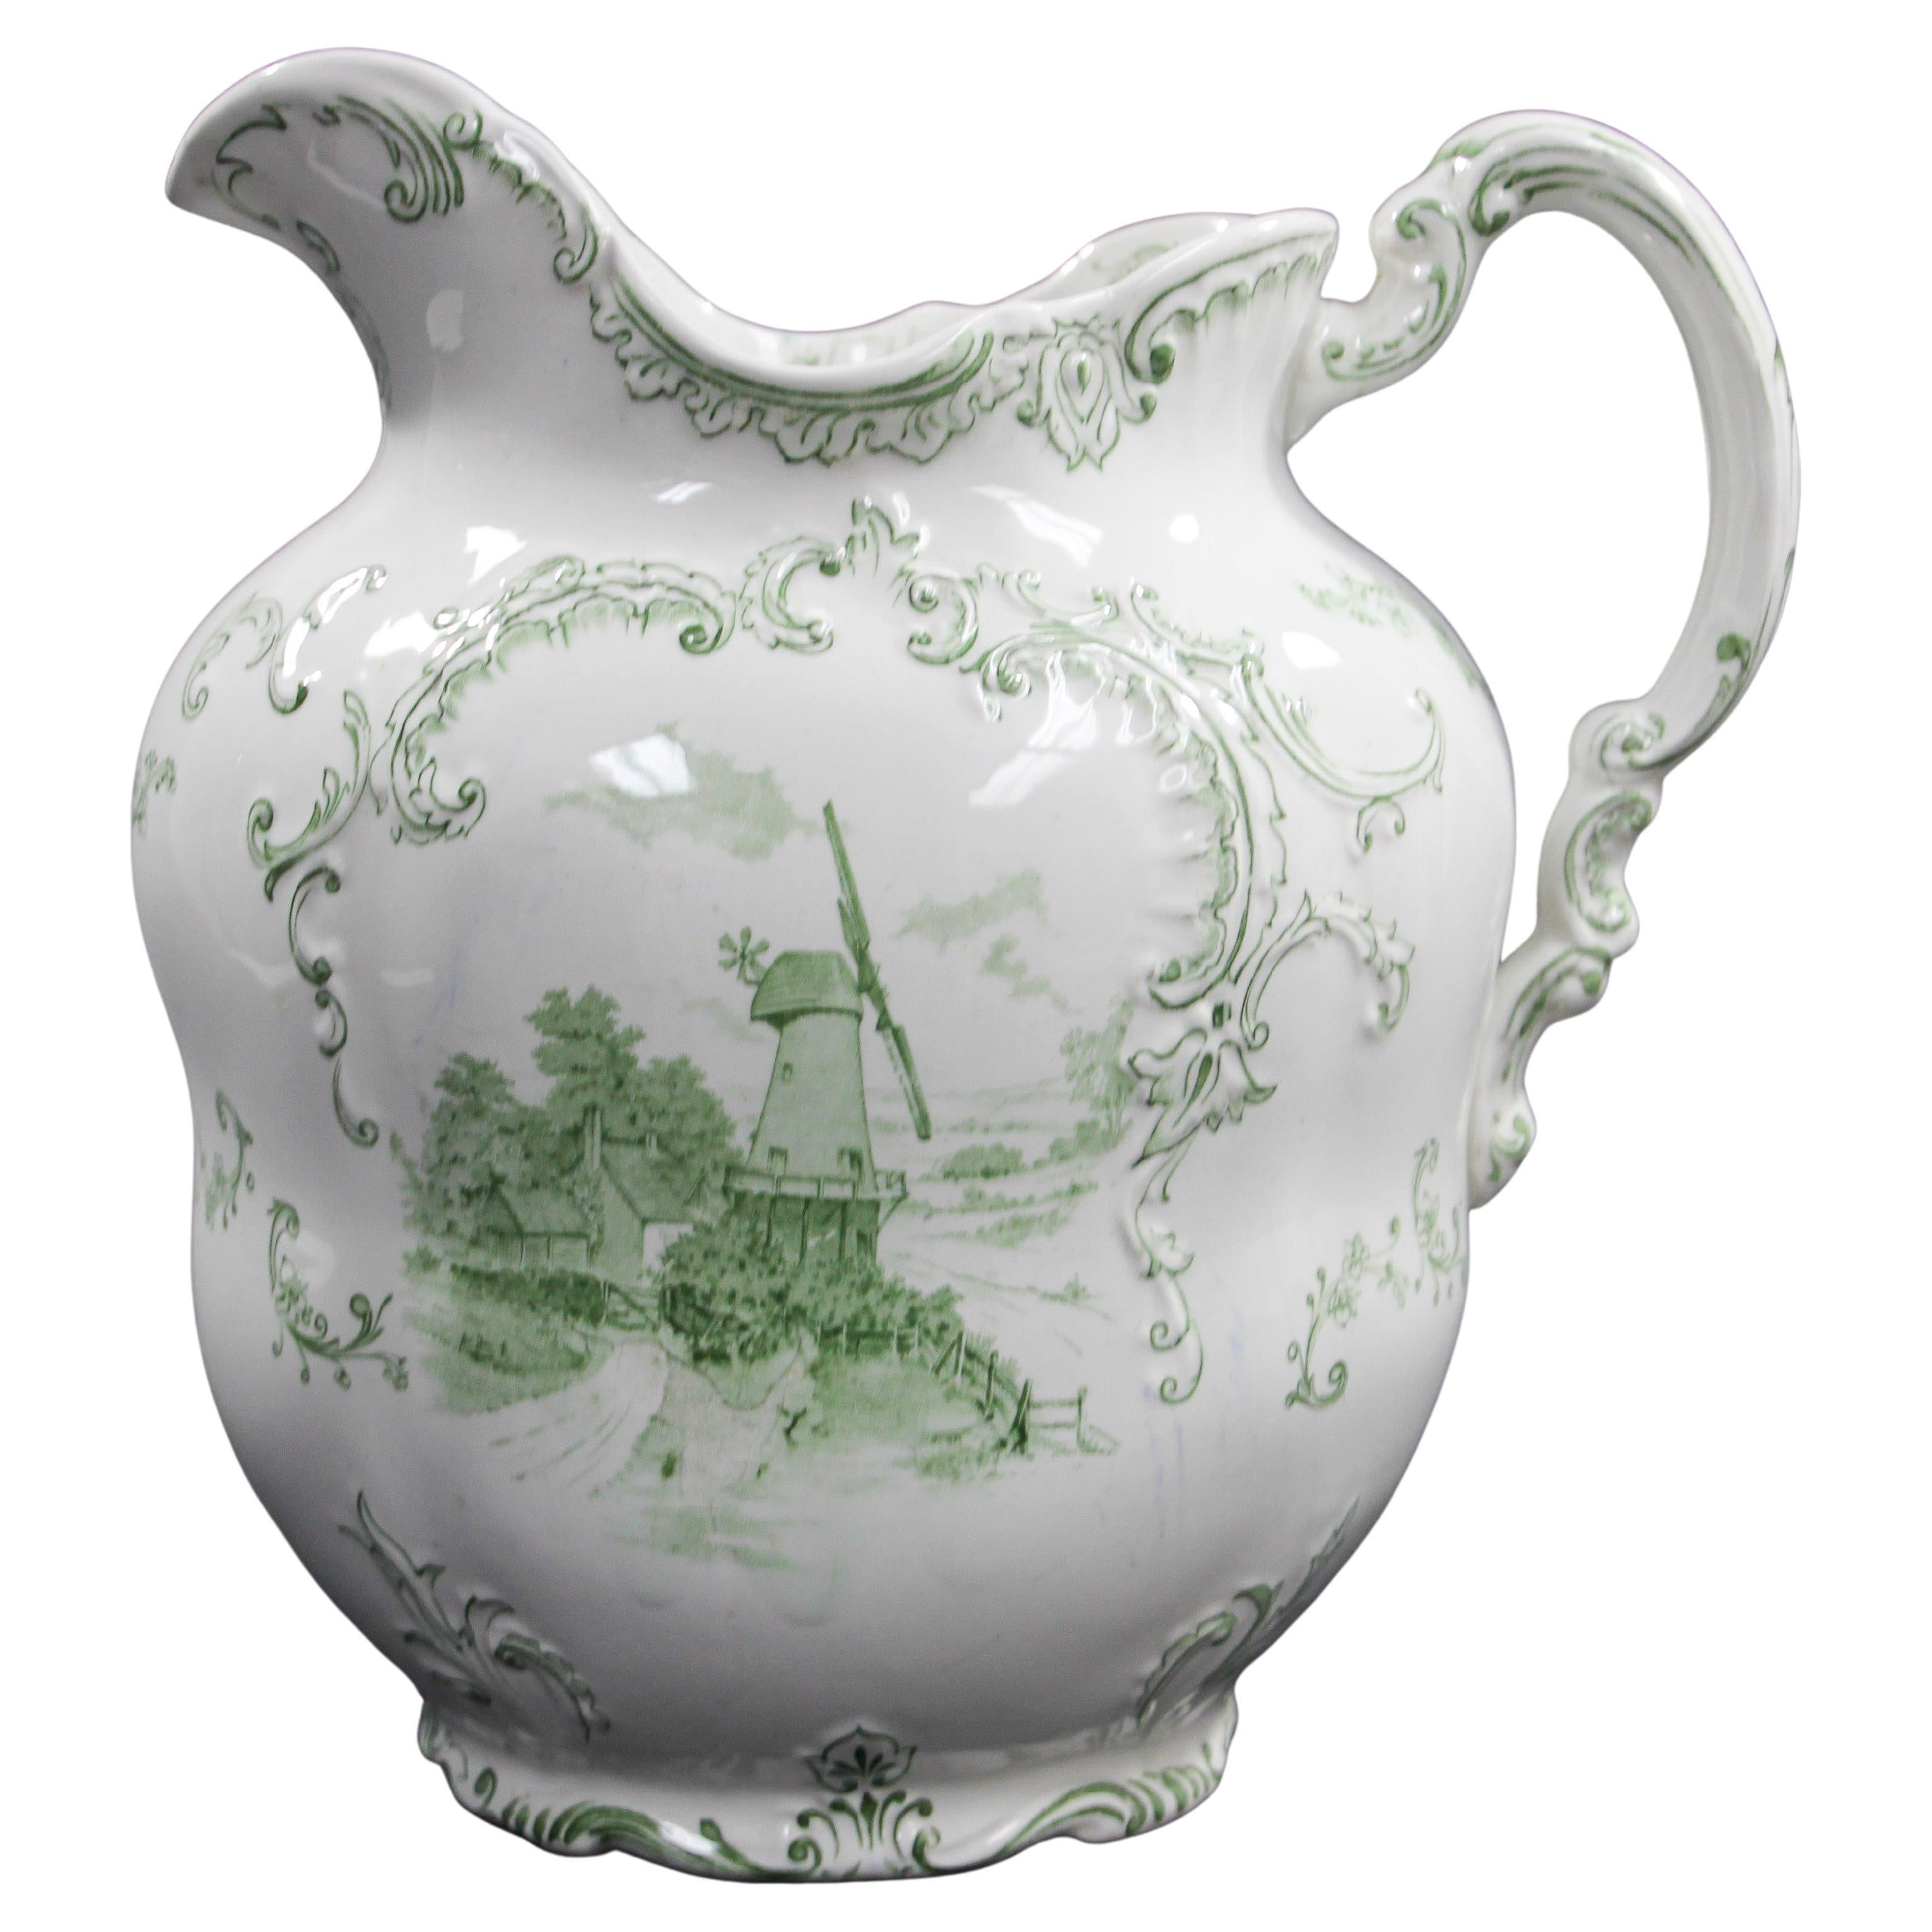 Large Ceramic Pitcher Green and White by Royal Delft England